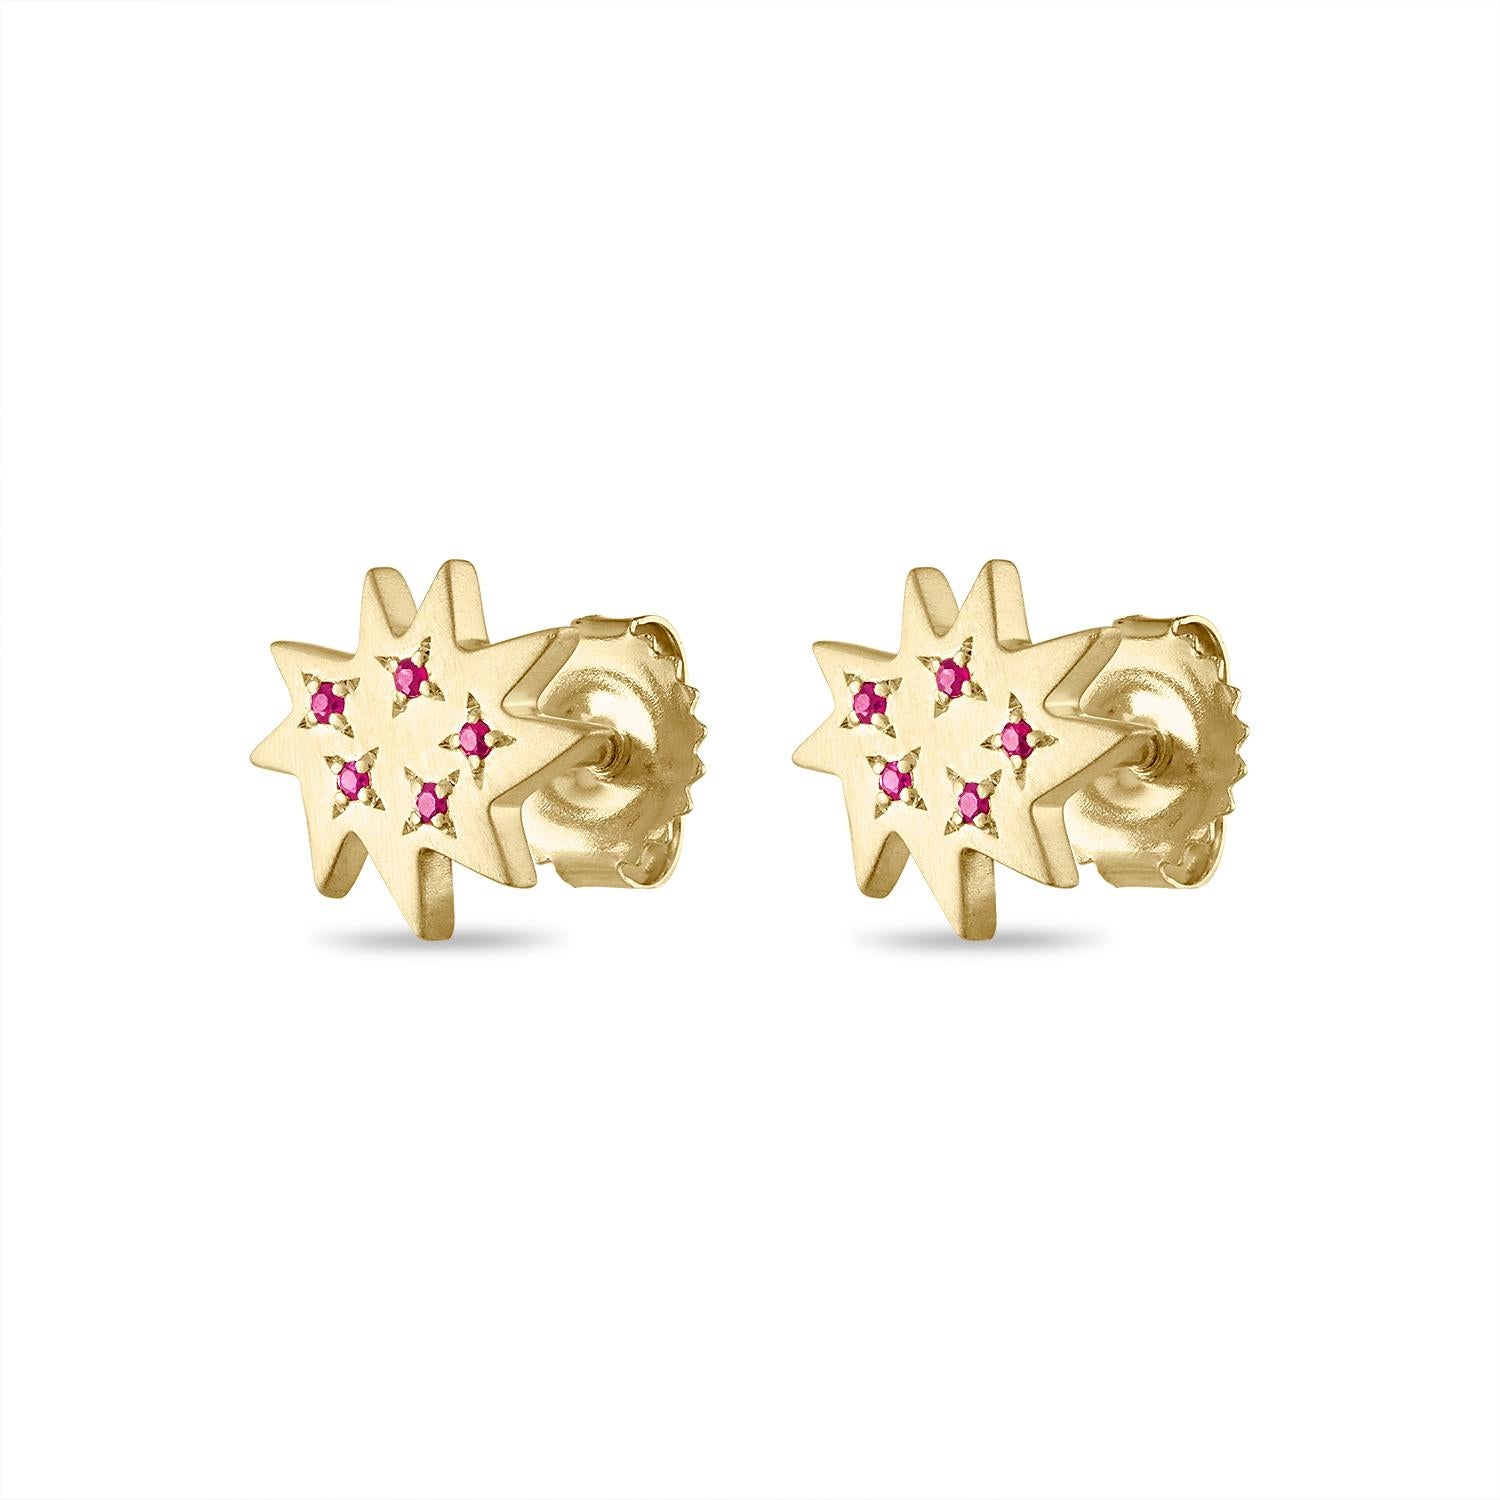 Perfect everyday earrings! Our new Mini Stella Studs go from morning to night with ease. Our iconic 14k gold organic star in our delicate mini size flatters everyone and adds a touch of sparkle with five tiny rubies on each stud. And now through the